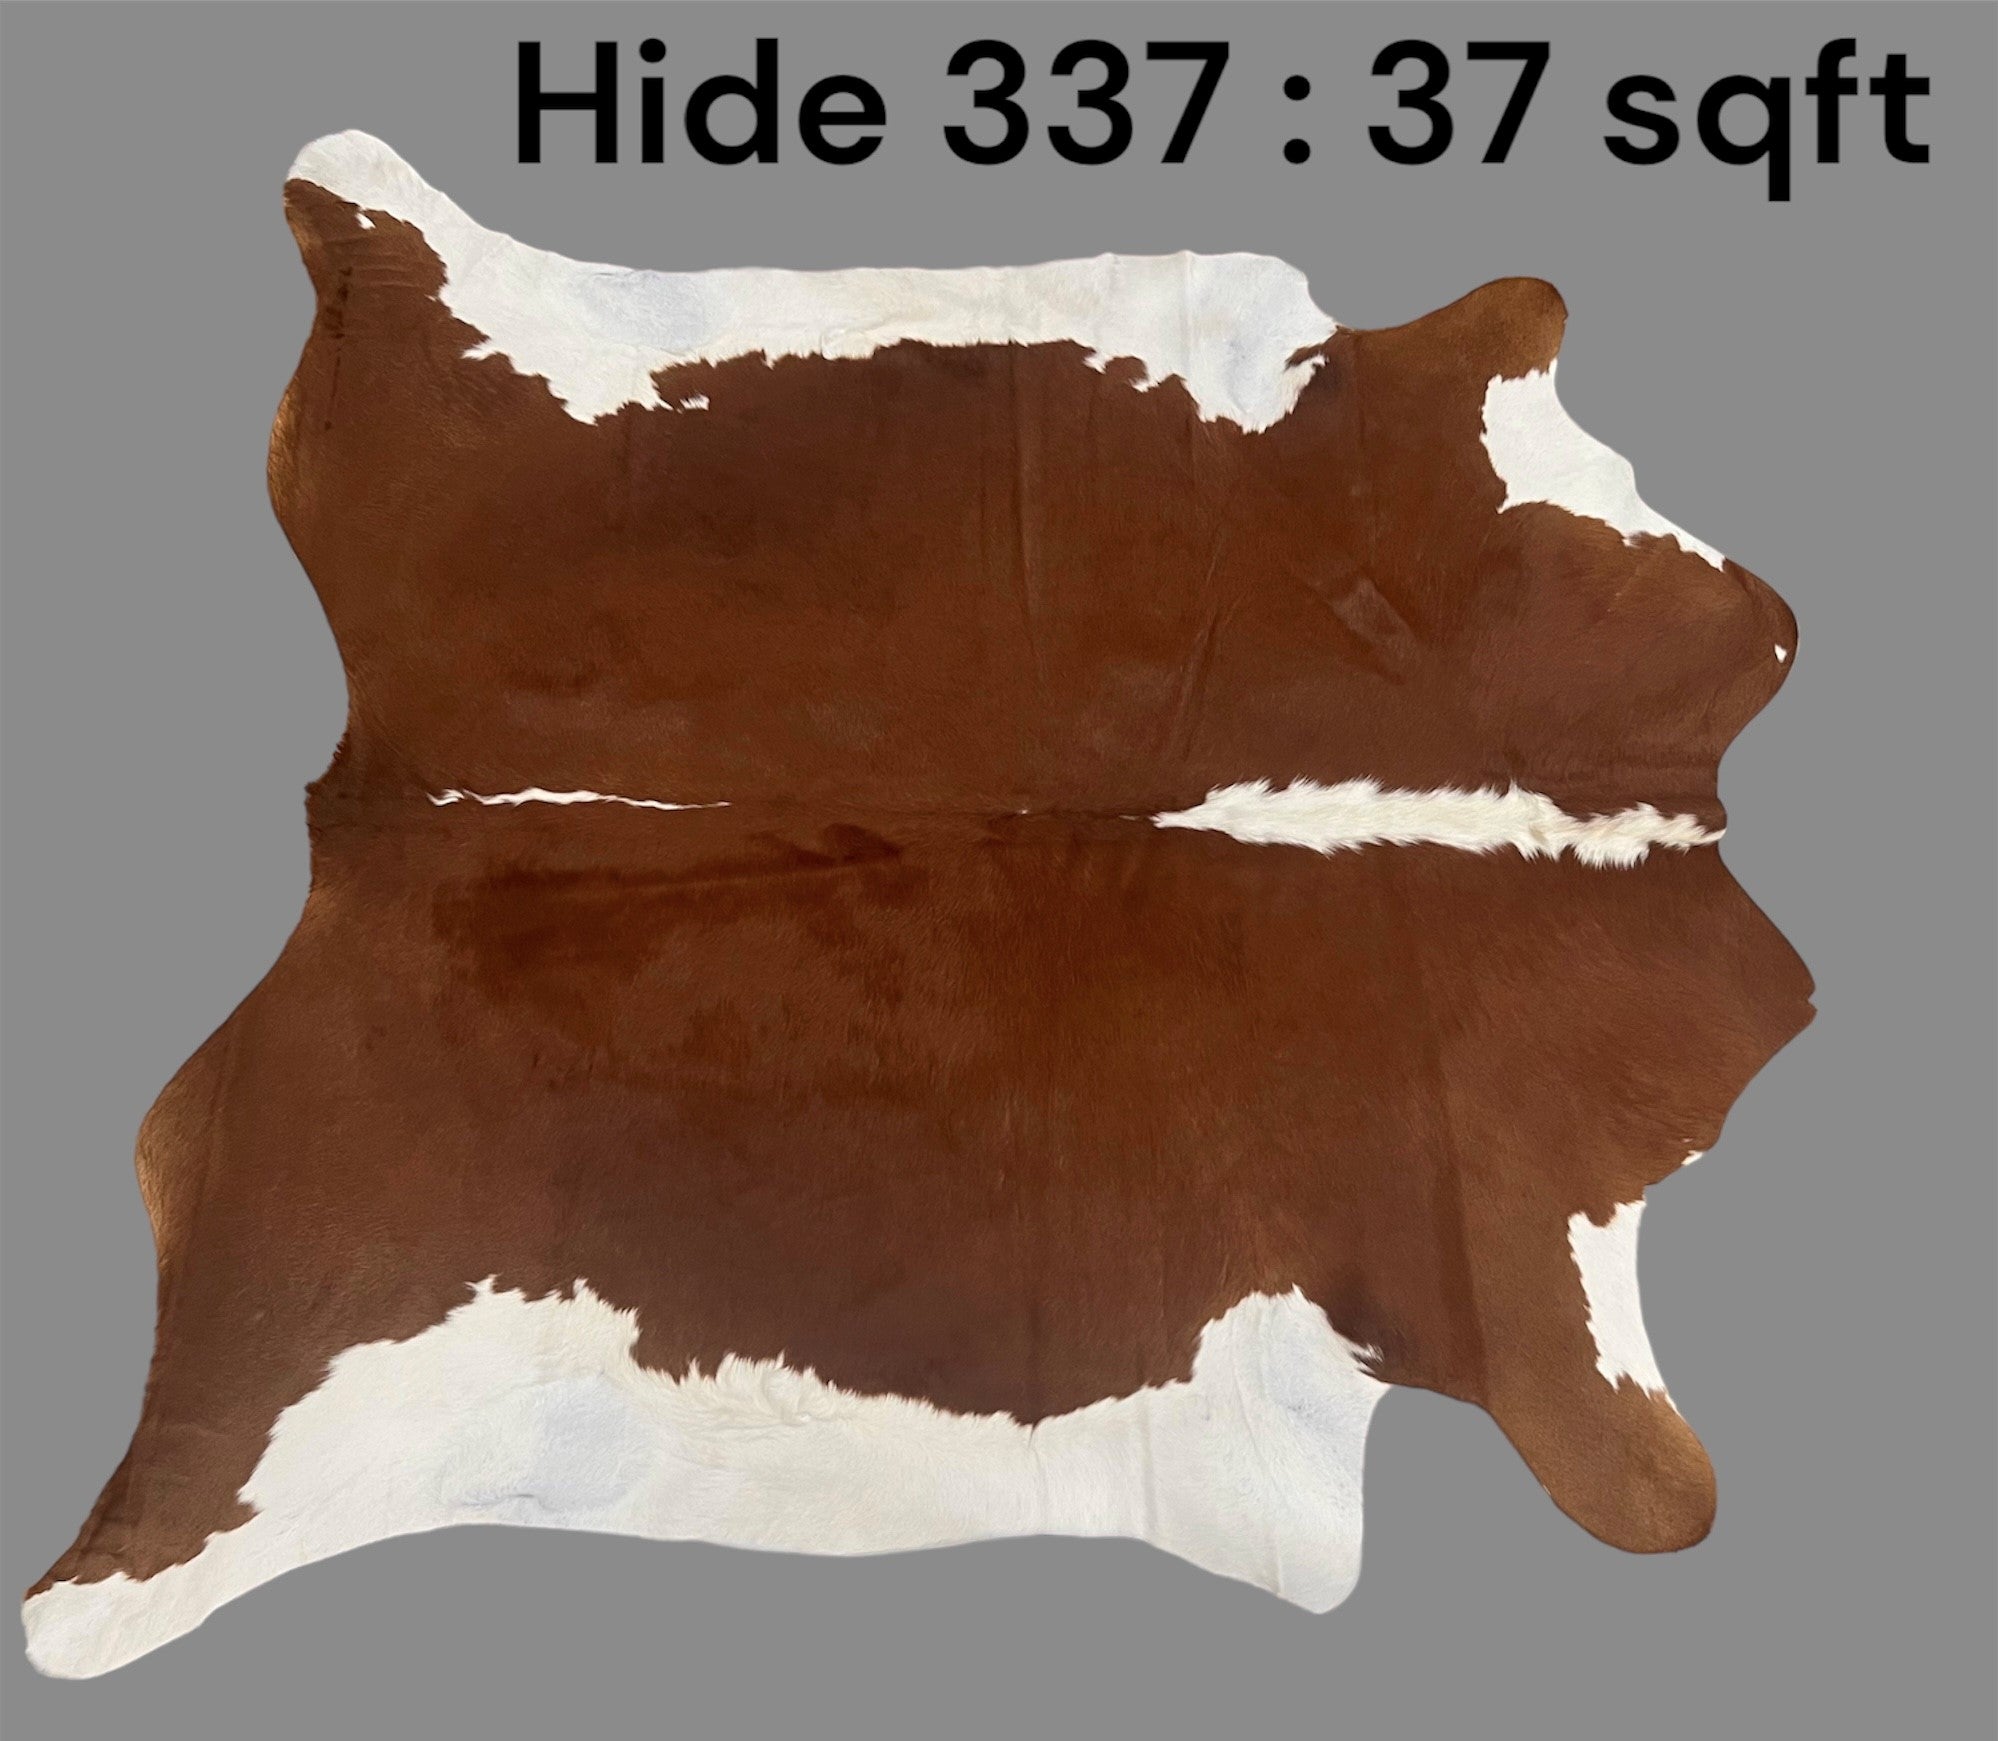 Natural Hair On Cow Hide : This Hide Is Perfect For Wall Hanging, Leather Rugs, Leather Upholstery & Leather Accessories. (Hide337)